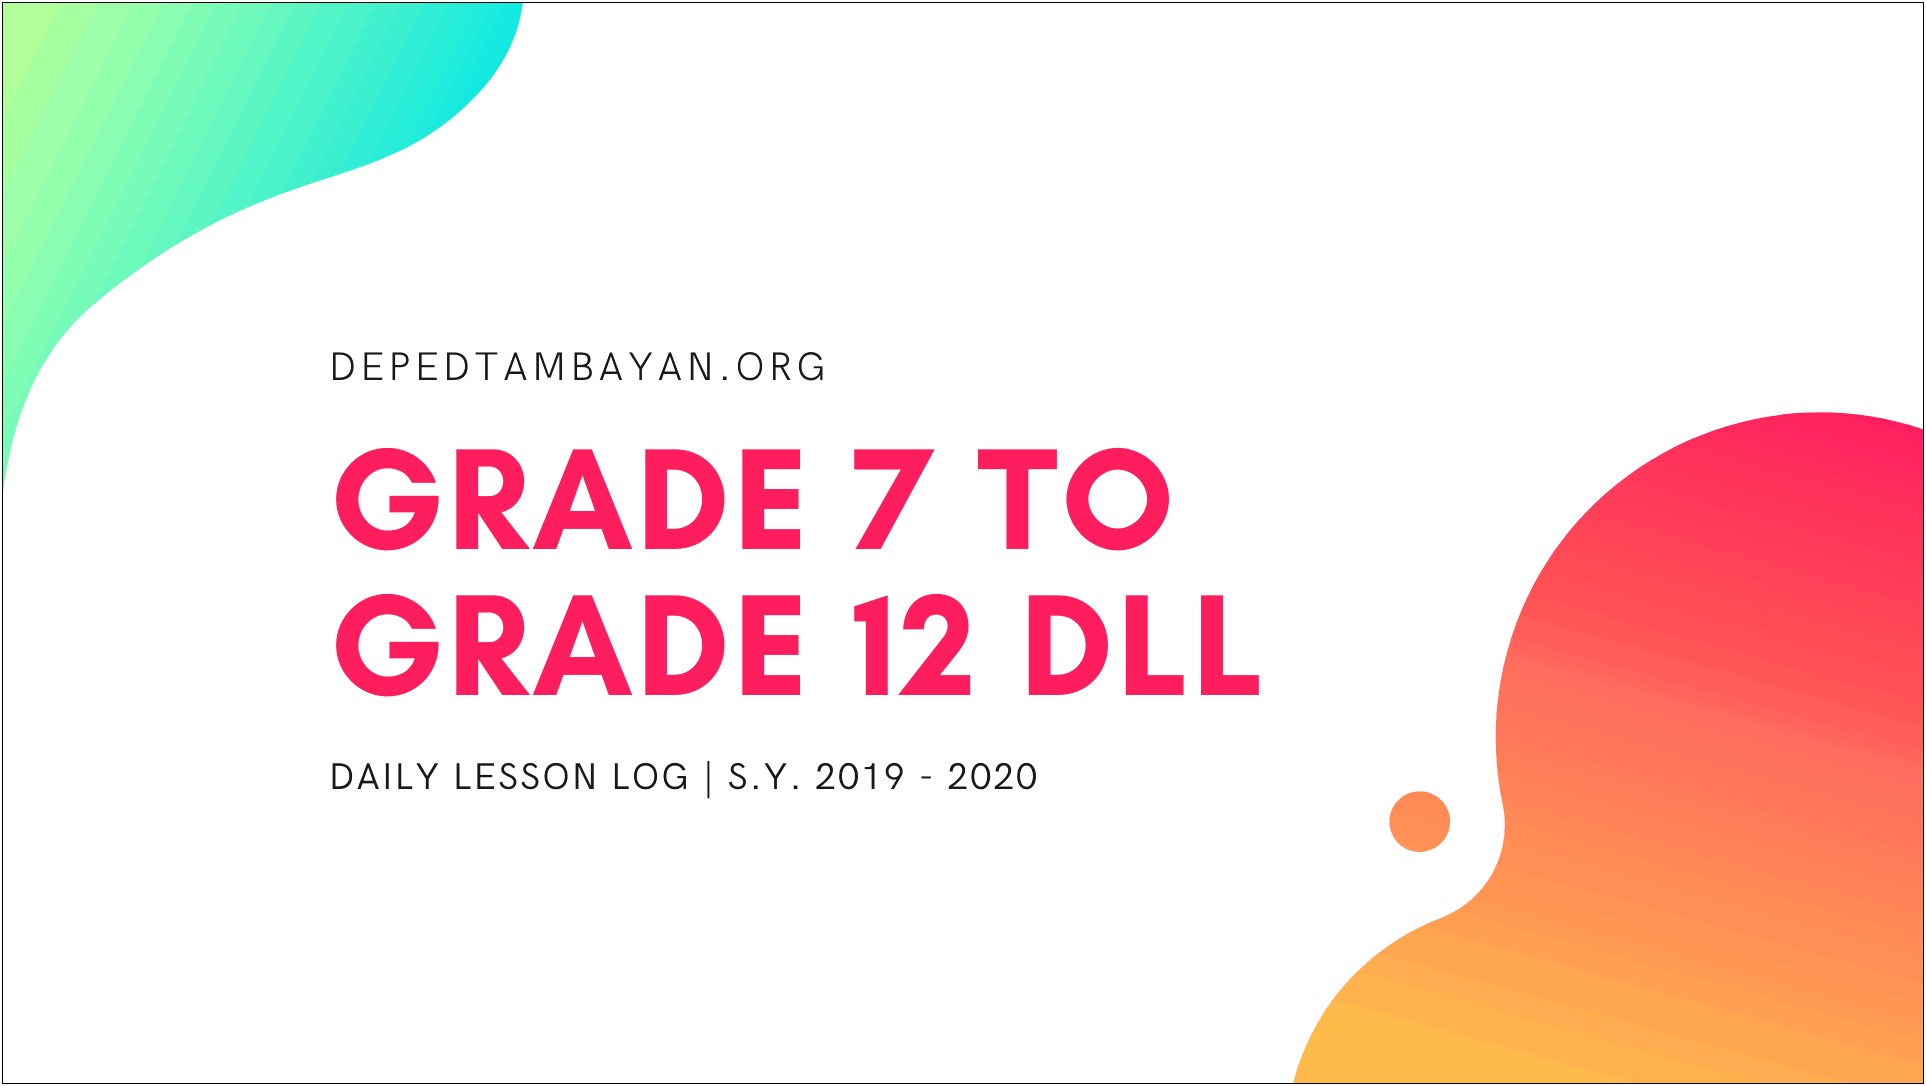 Daily Lesson Log Template Word Deped